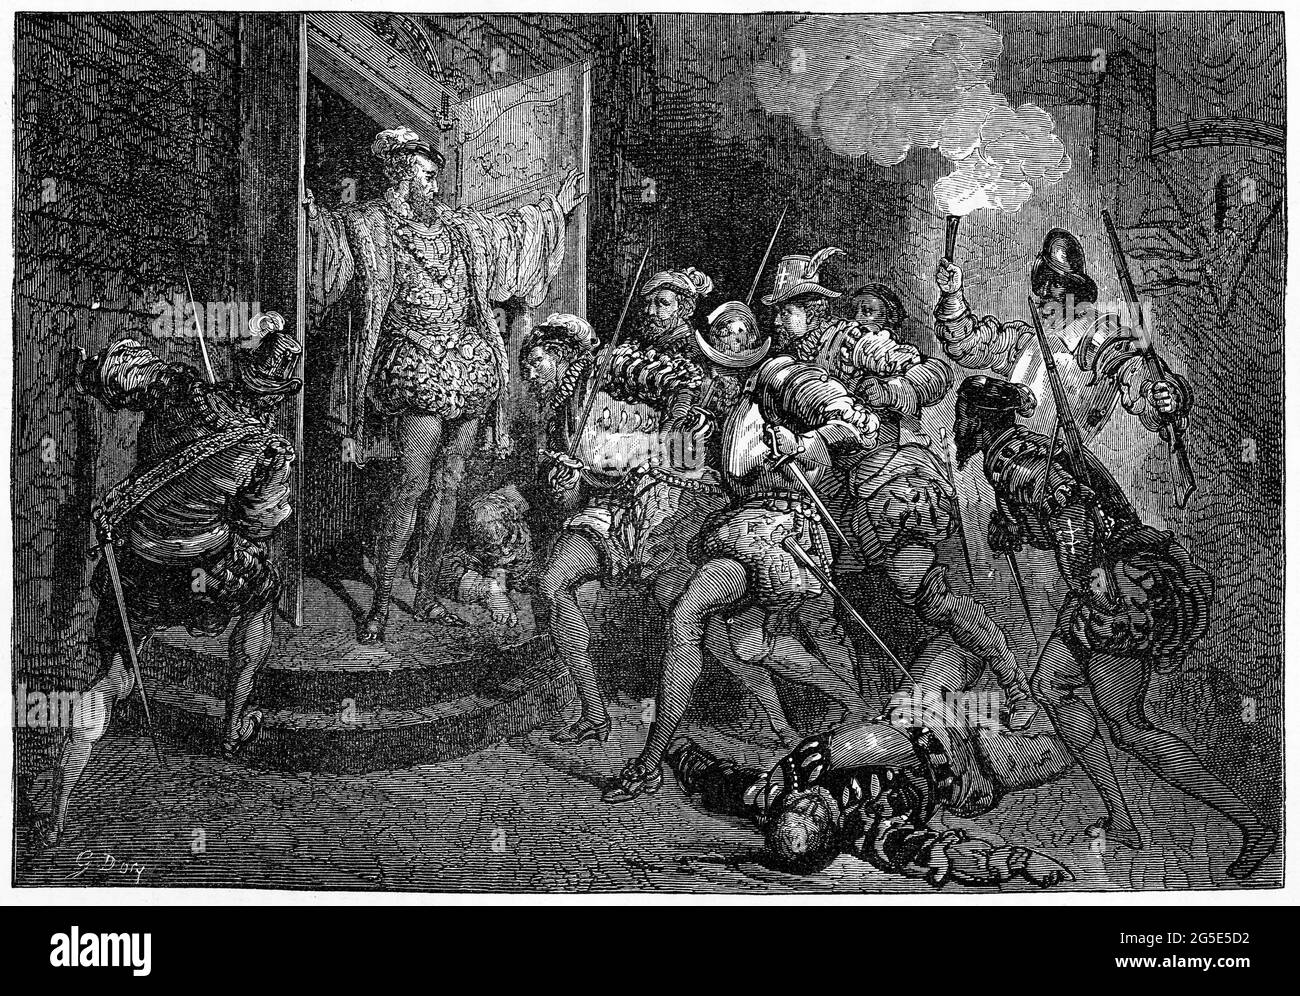 Engraving of Admiral Coligny facing his enemies during the St Bartholemew's Day massacre, when Catholics rose up against their Hugeunot neighbours in France, and Coligny was murdered. Stock Photo